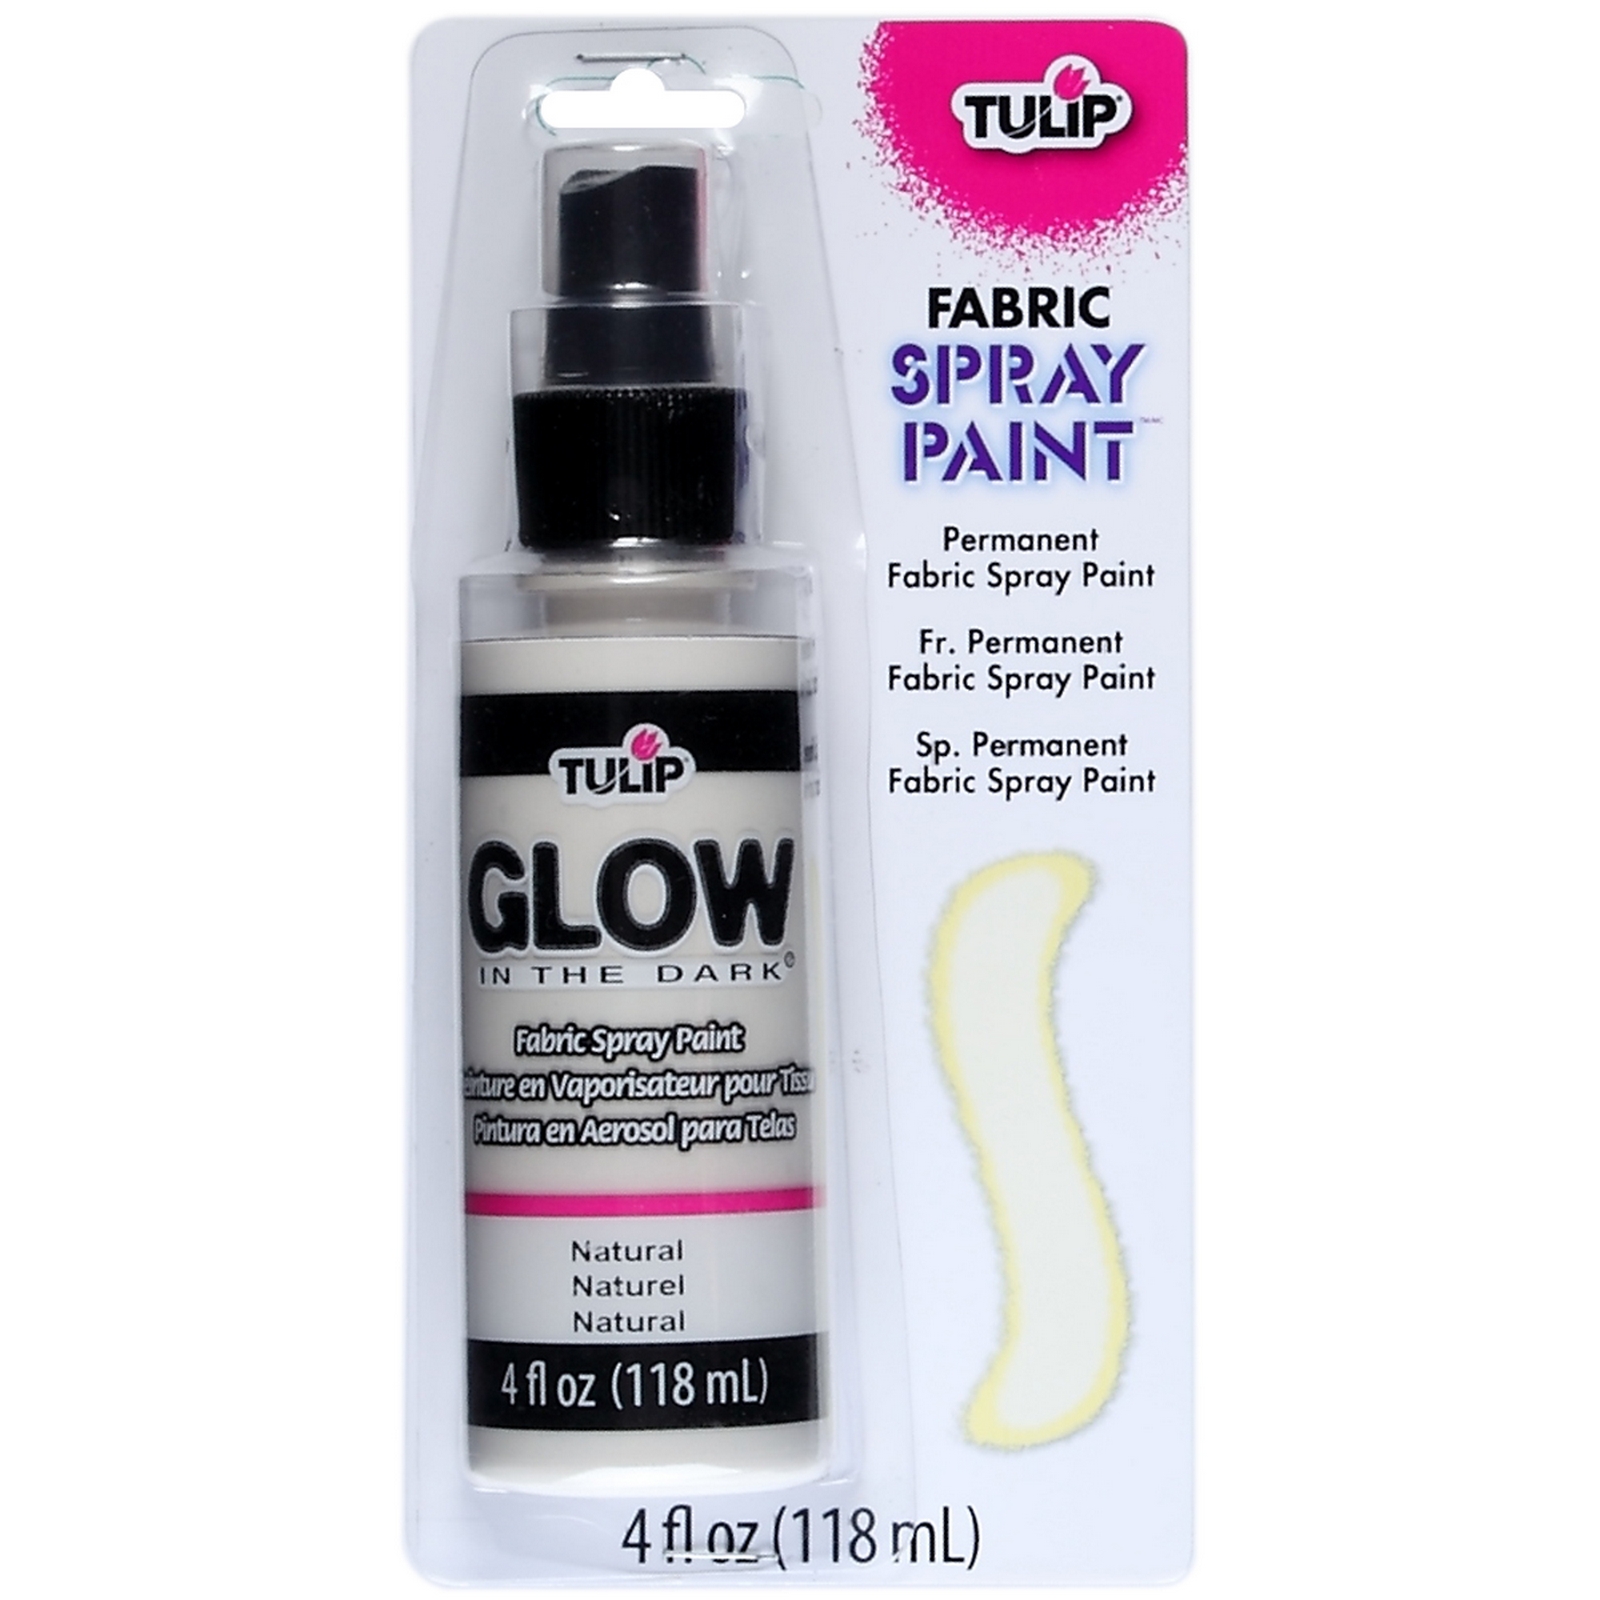 Tulip Fabric Spray Paint 4 Ounces Glow In The Dark Glow In The Dark Fabric Spray Paint